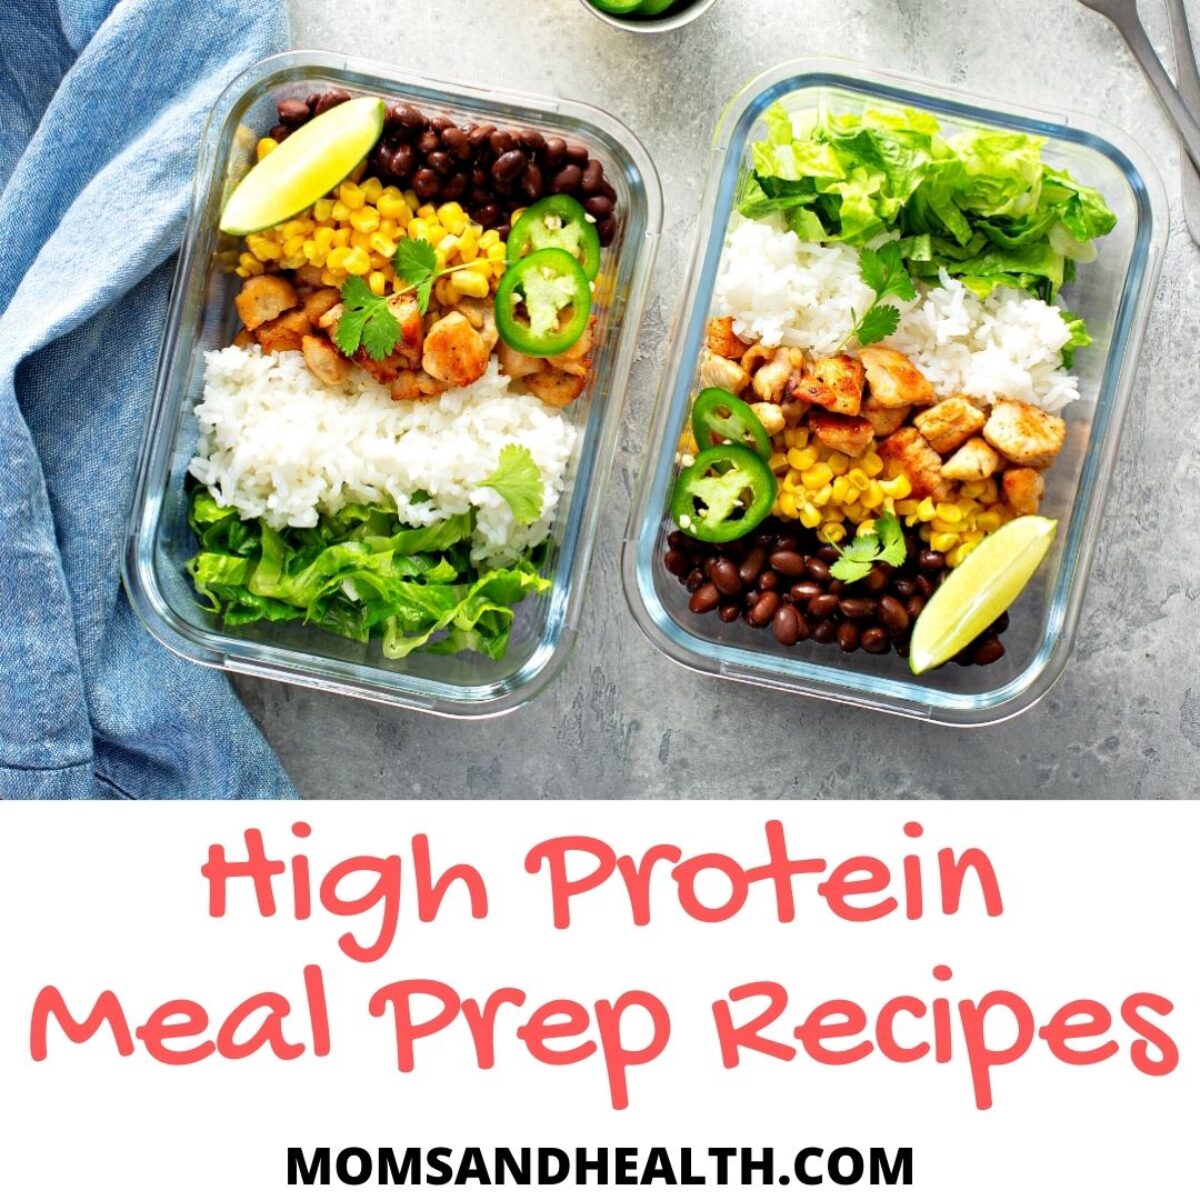 High Protein Meal Prep Recipes That Are Easy To Make - One